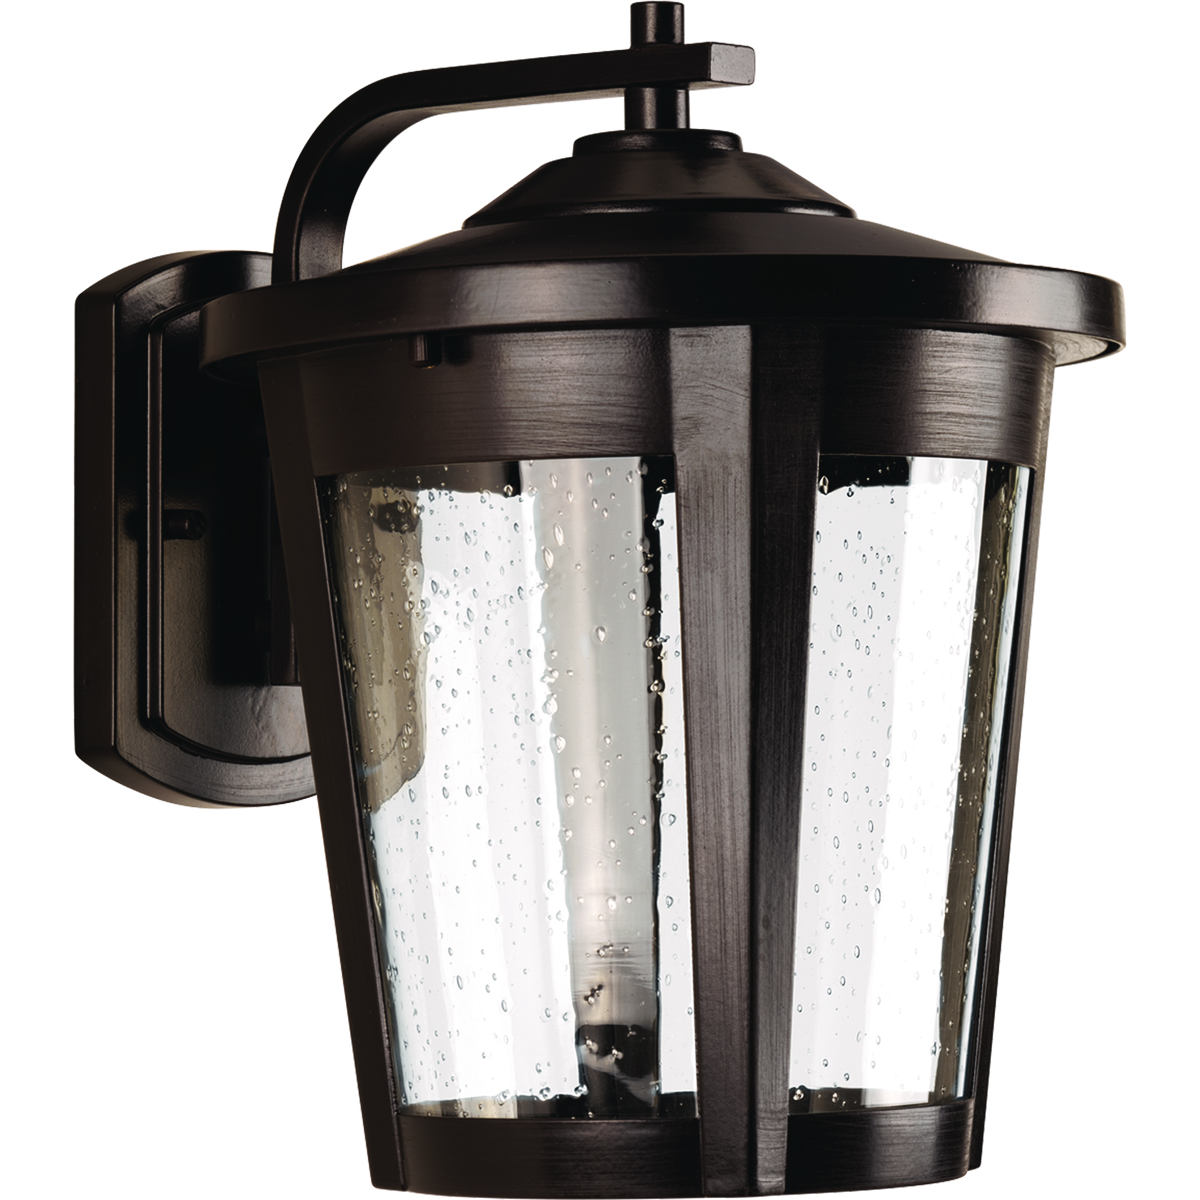 The East Haven LED Collection offers modern styling to complement a wide variety of home styles. The one-light large LED outdoor wall lantern has an Antique Bronze frame that cradles a seeded glass shade. 120V AC replaceable LED module, 1,211 lumens 71.2 lumens/watt per module (source). 3000K color temperature and 90+ CRI.